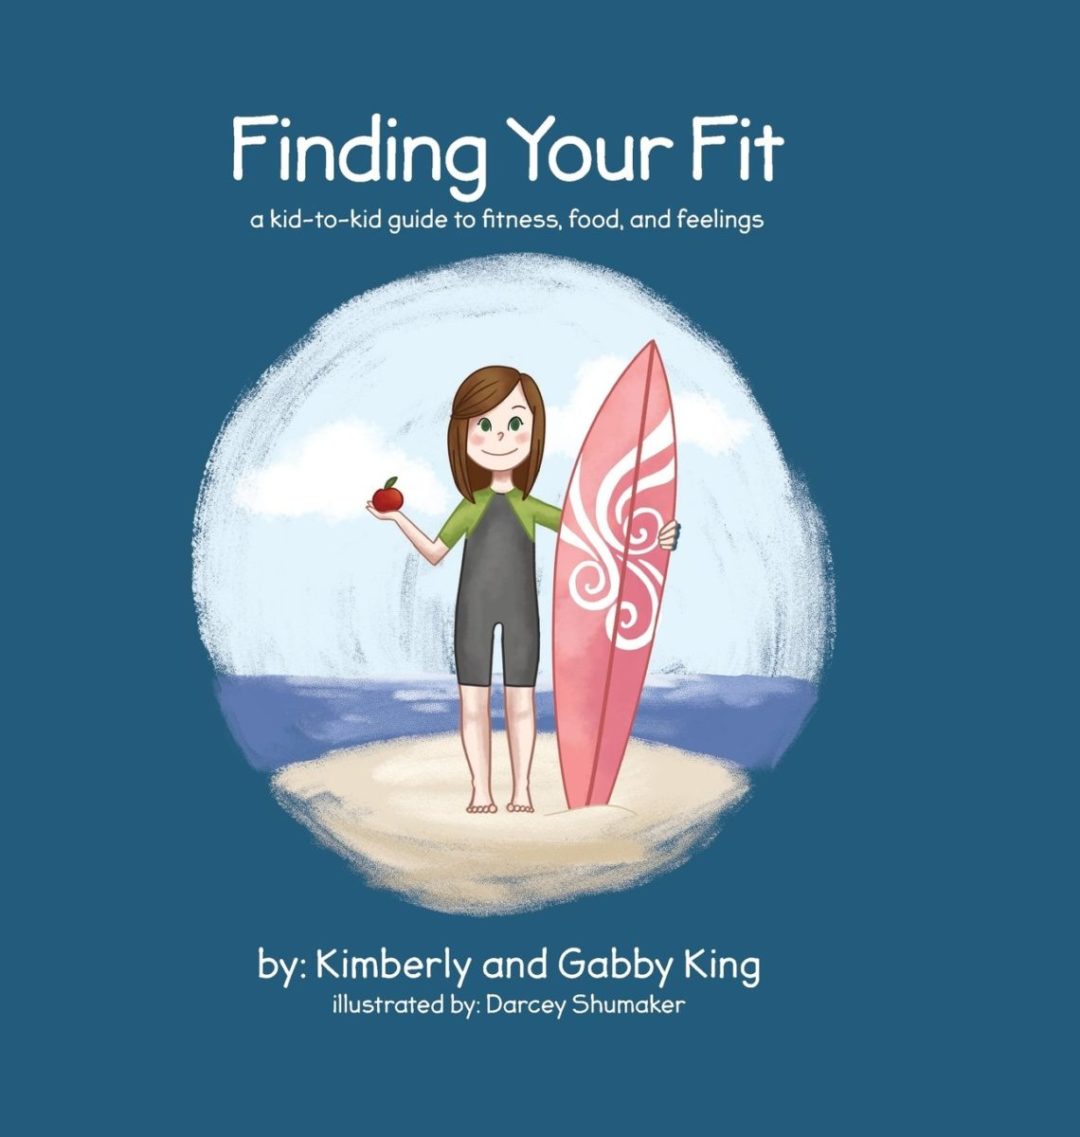 Finding Your Fit: A Kid-to-Kid Guide to Fitness, Food, and Feelings